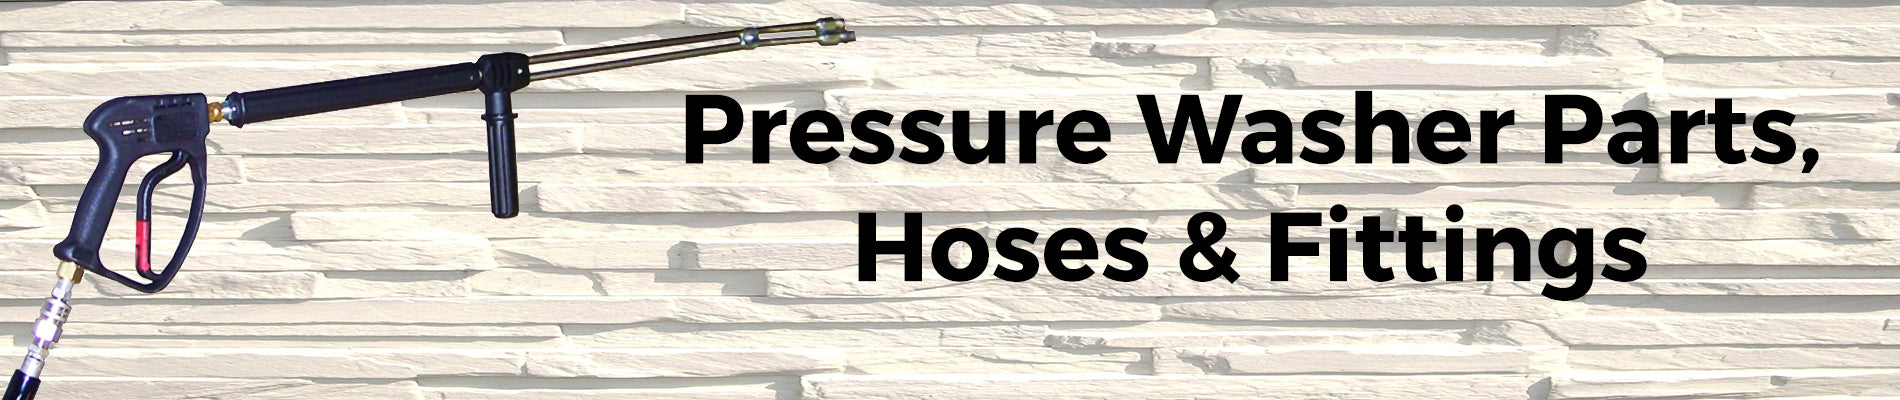 Pressure Washer Parts, Hoses & Fittings